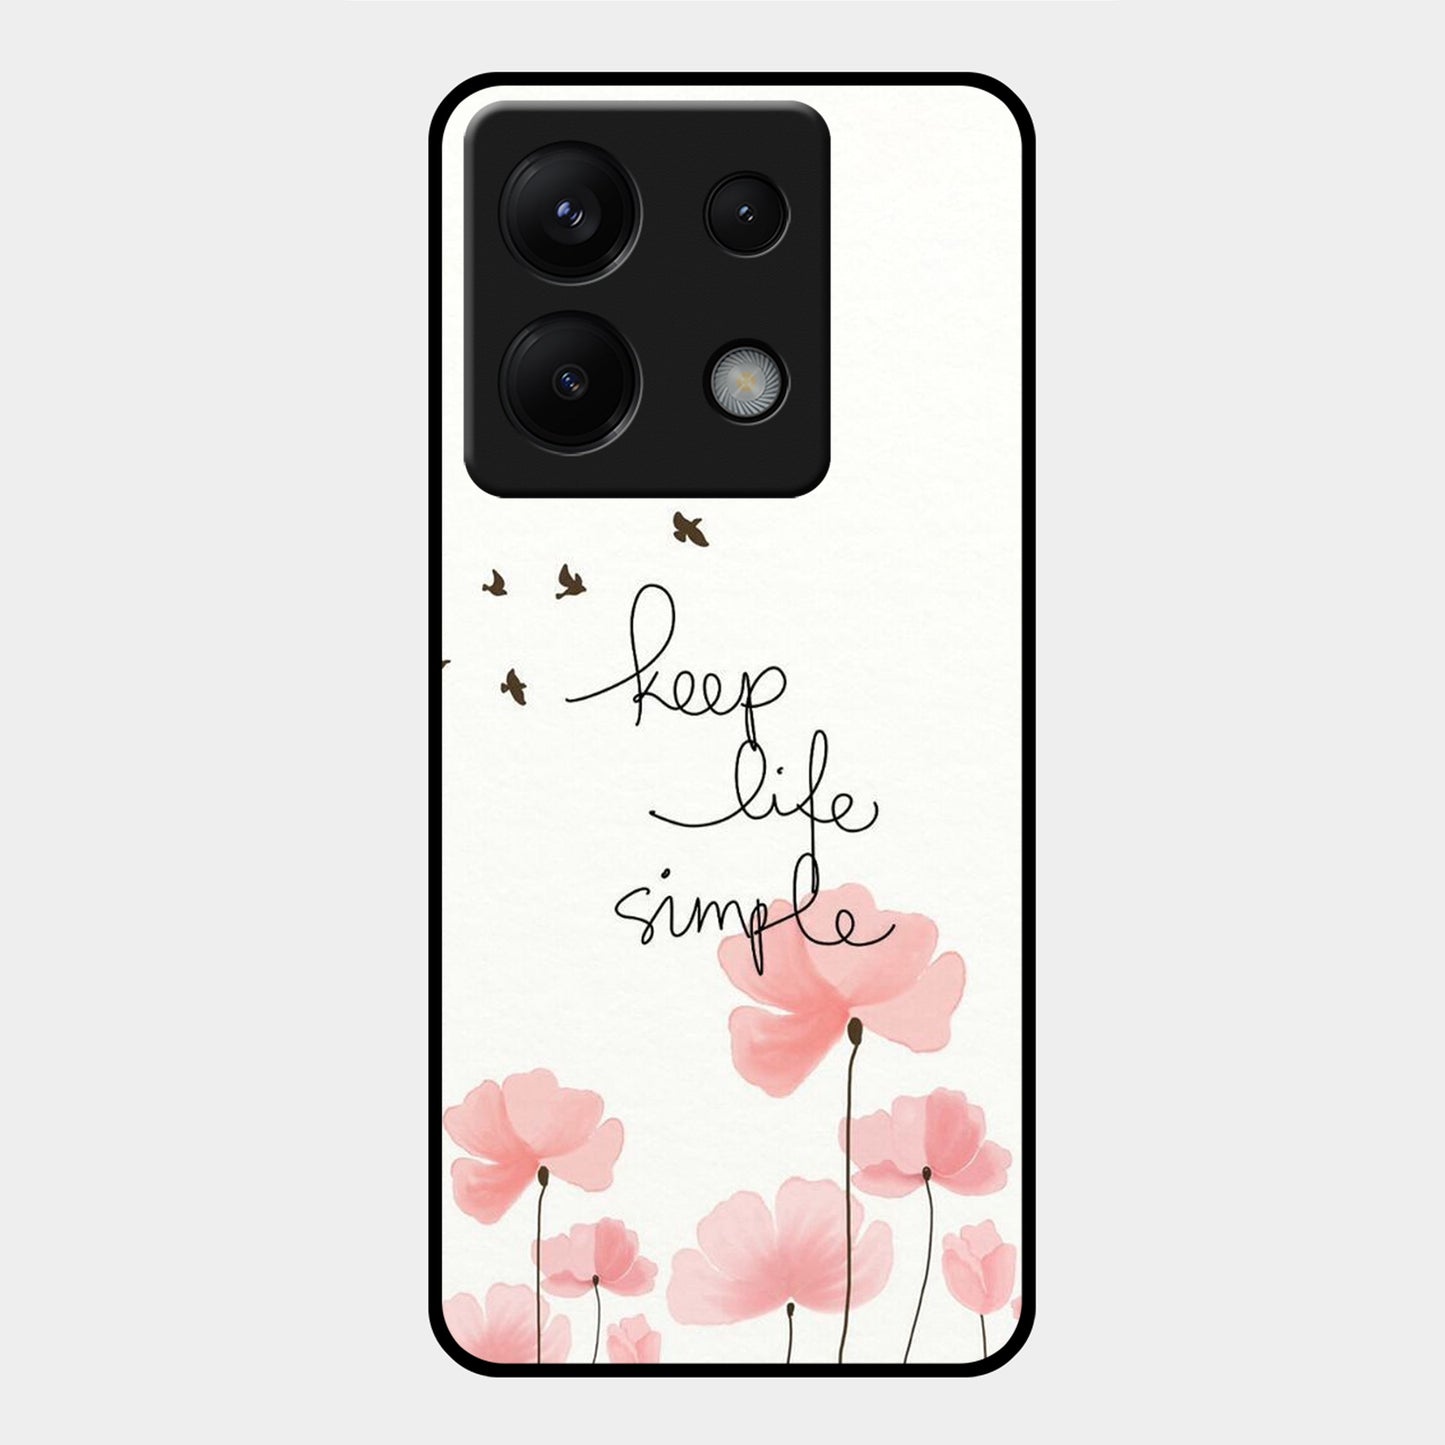 Keep Life Simple  Glossy Metal Case Cover For Redmi